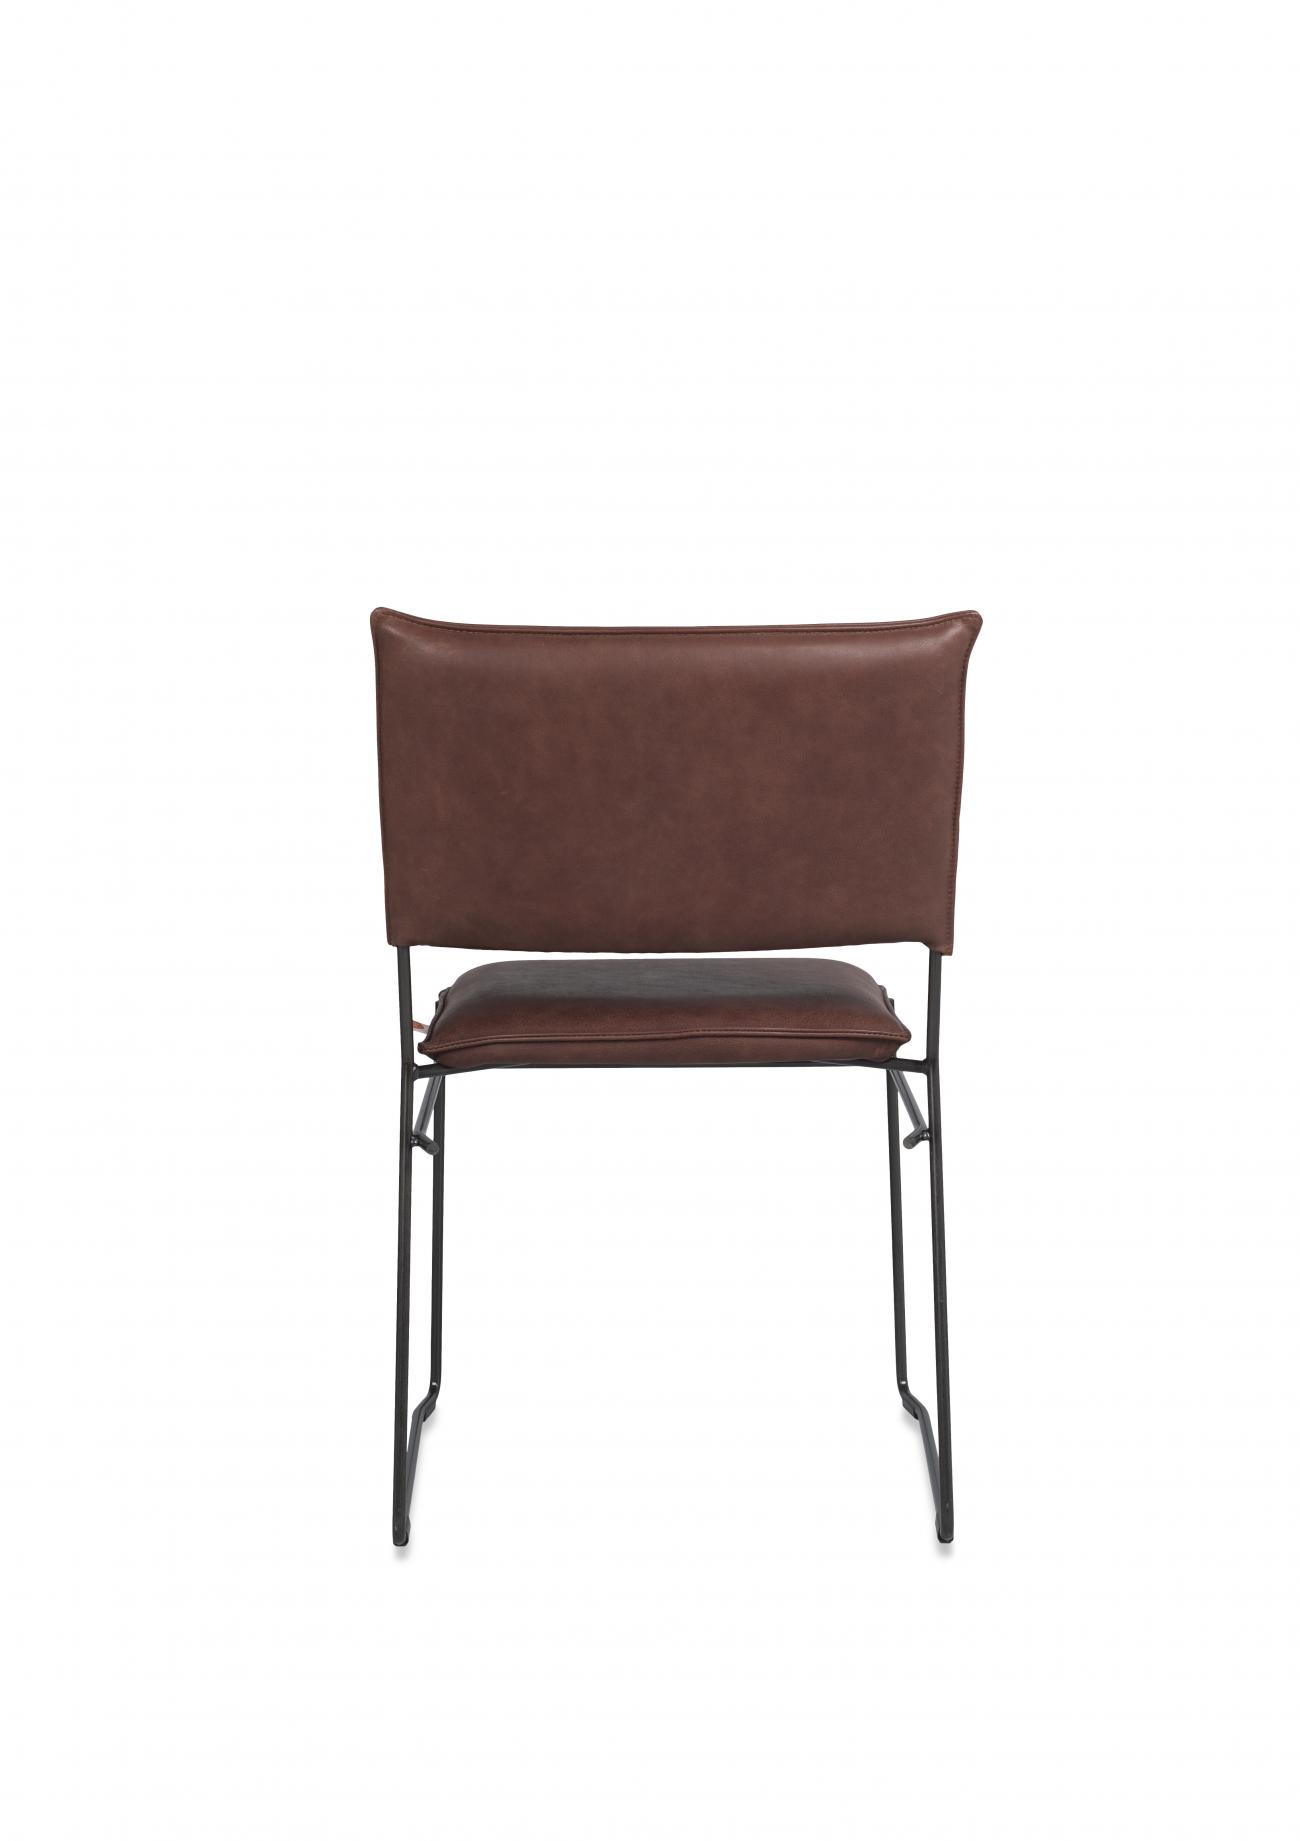 https://www.fundesign.nl/media/catalog/product/n/o/norman_diningchair_stackable_frame_old_glory_bonanza_british_tan_back.jpg